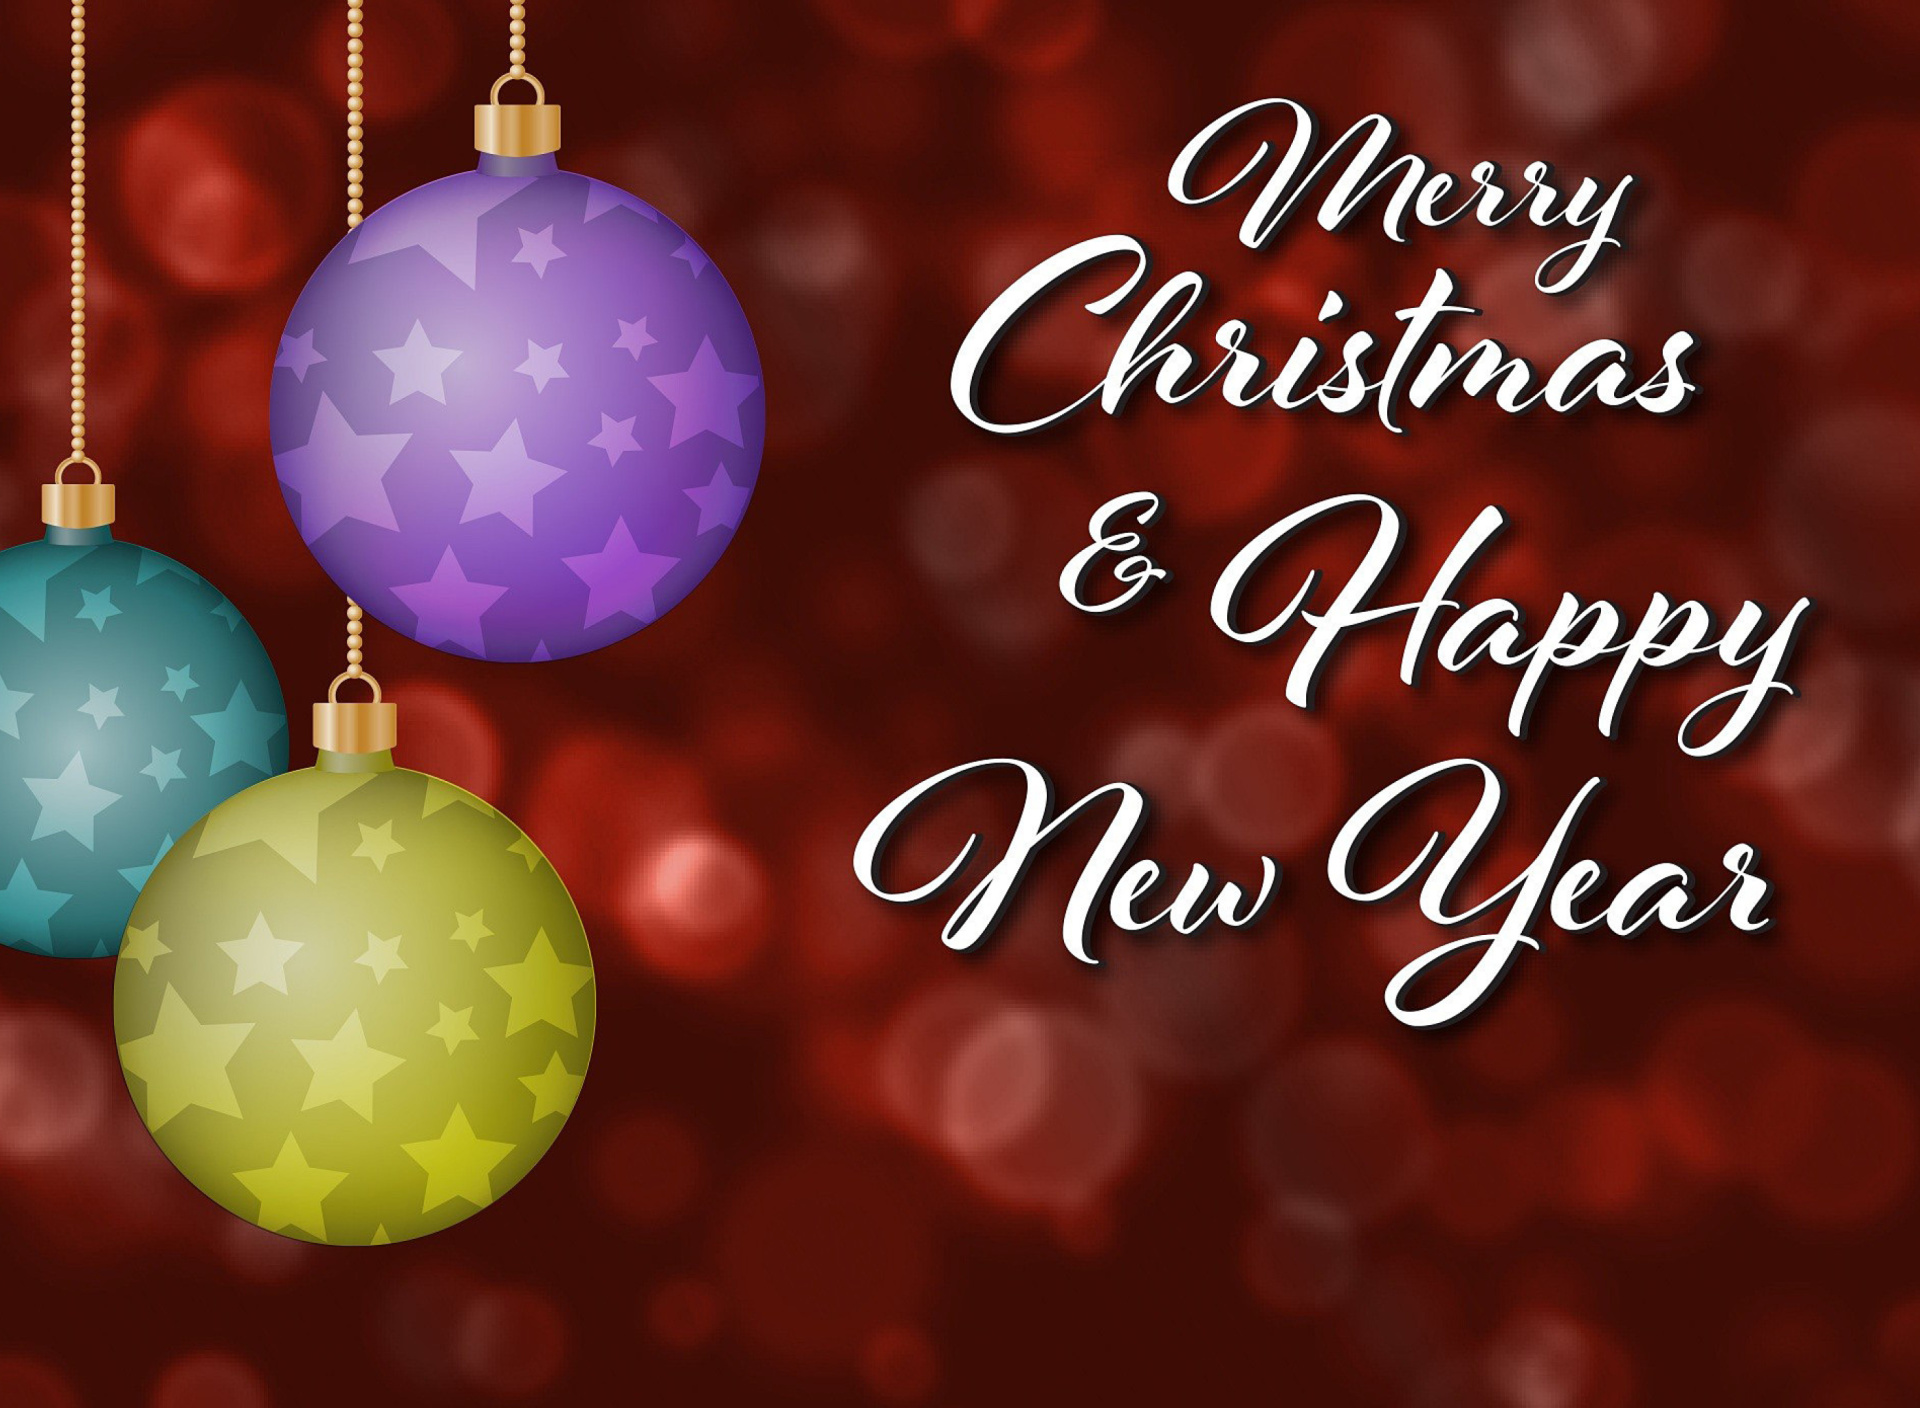 Merry Christmas and Best Wishes for a Happy New Year wallpaper 1920x1408